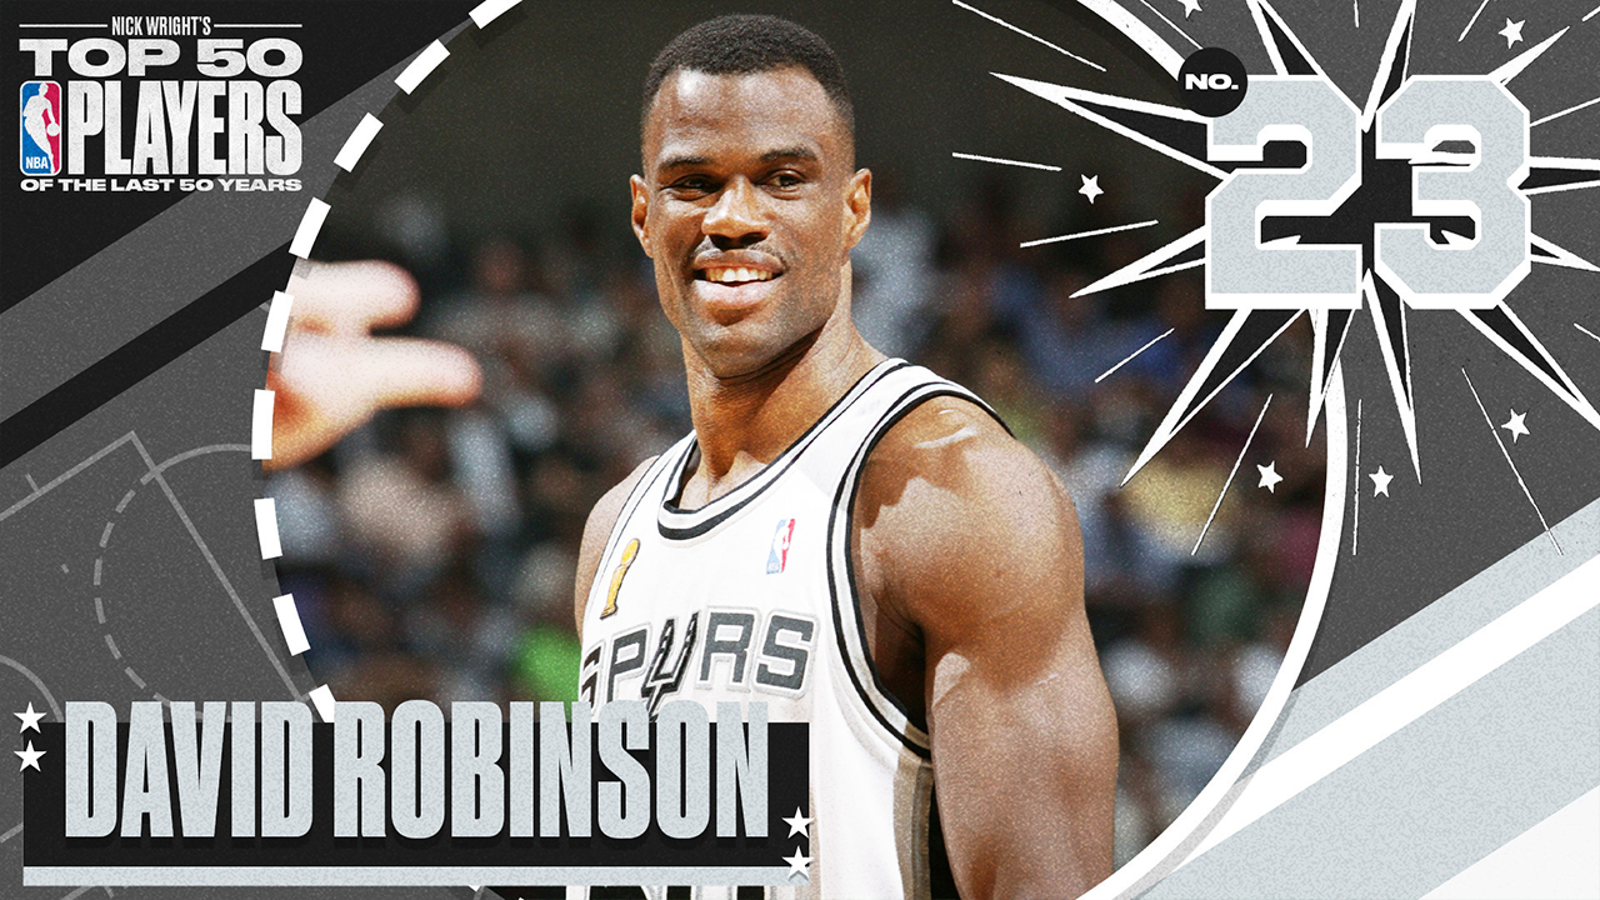 David Robinson is No. 23 on Nick Wright's Top 50 NBA Players of the Last 50 Years